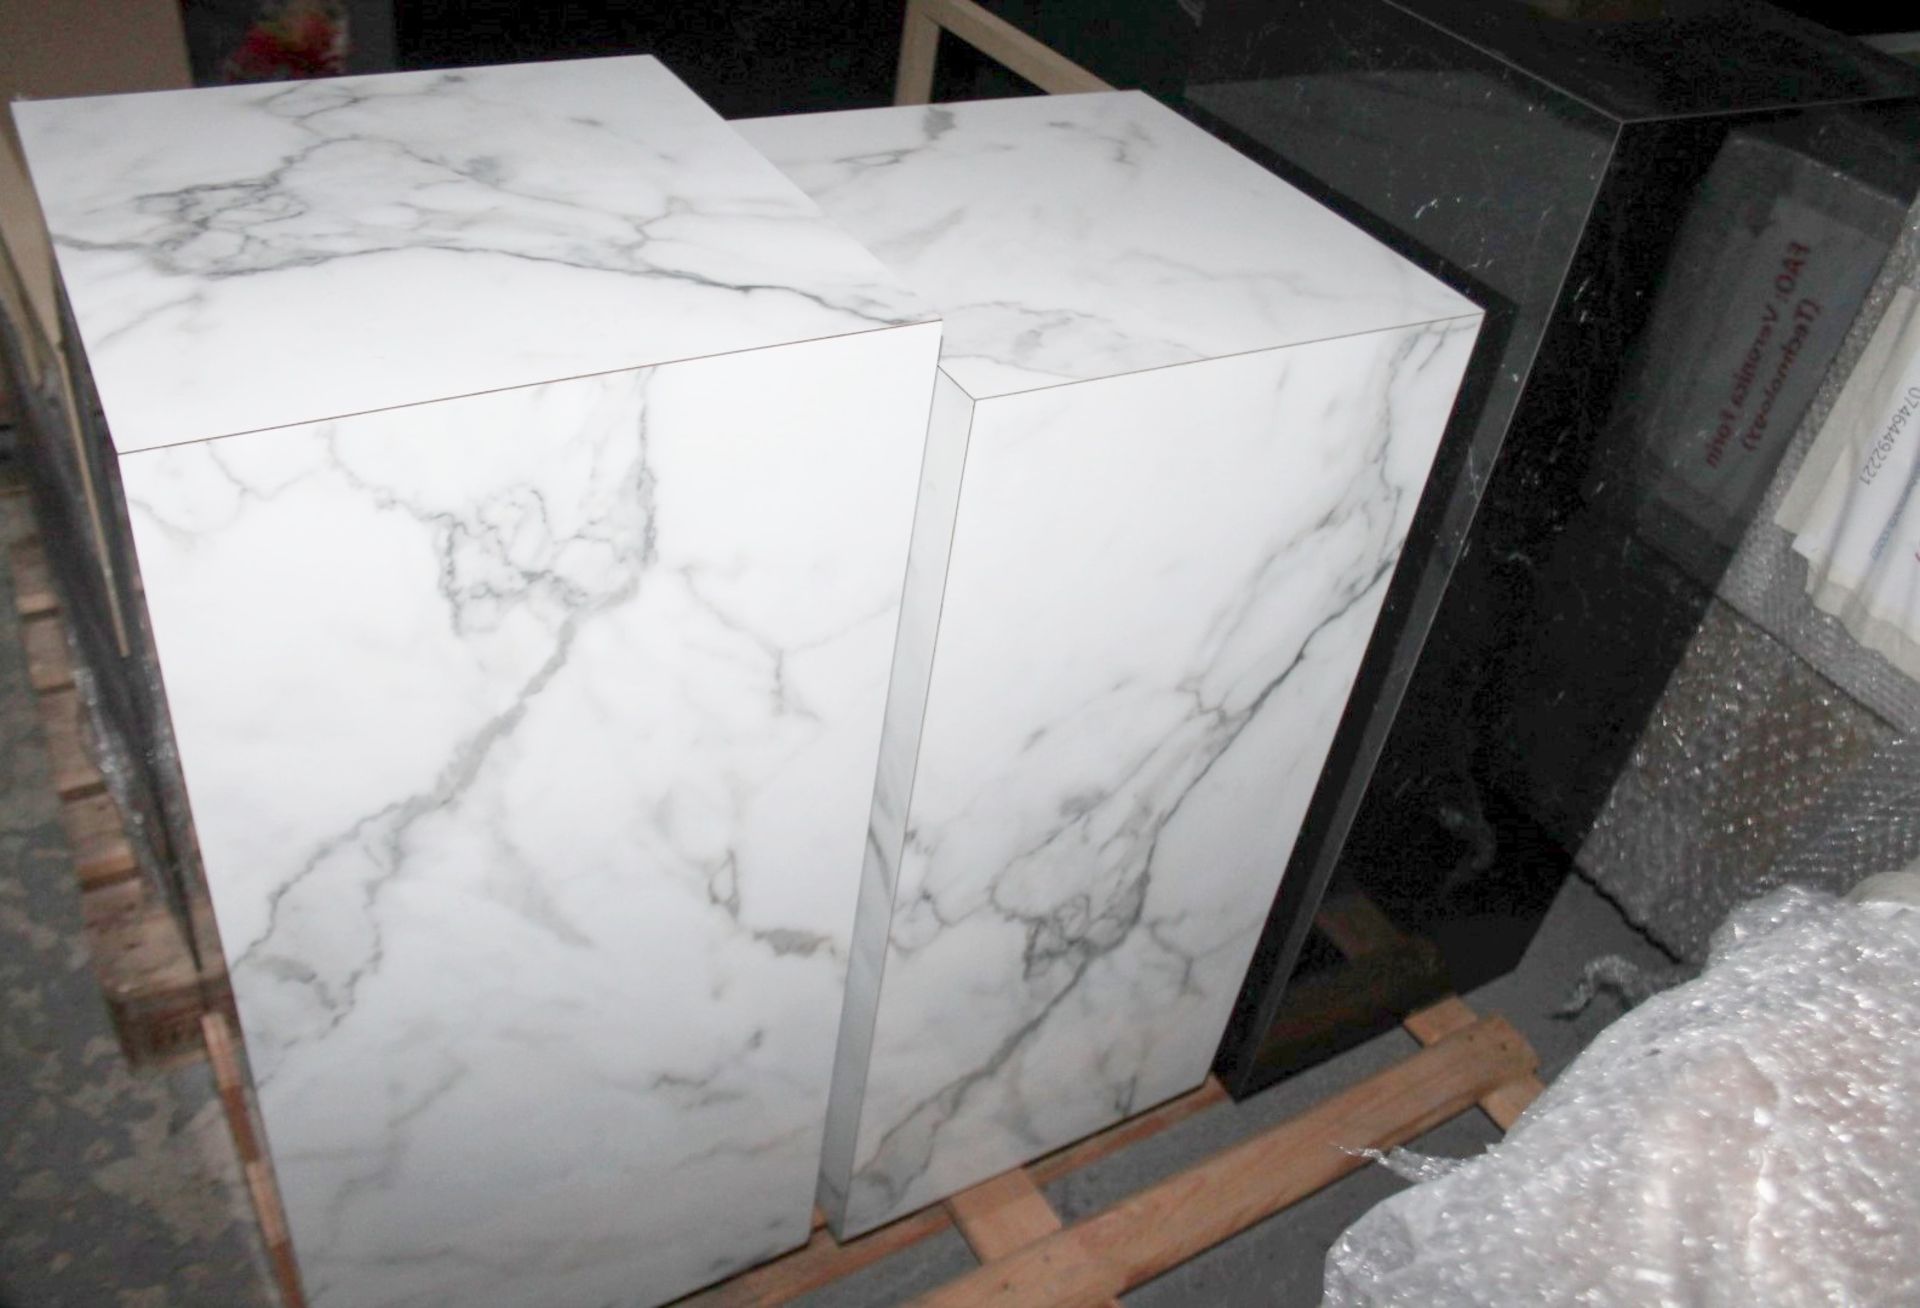 3 x Assorted Tall Retail Display Plinth, All With A Marble-effect Aesthetic - Recently Removed